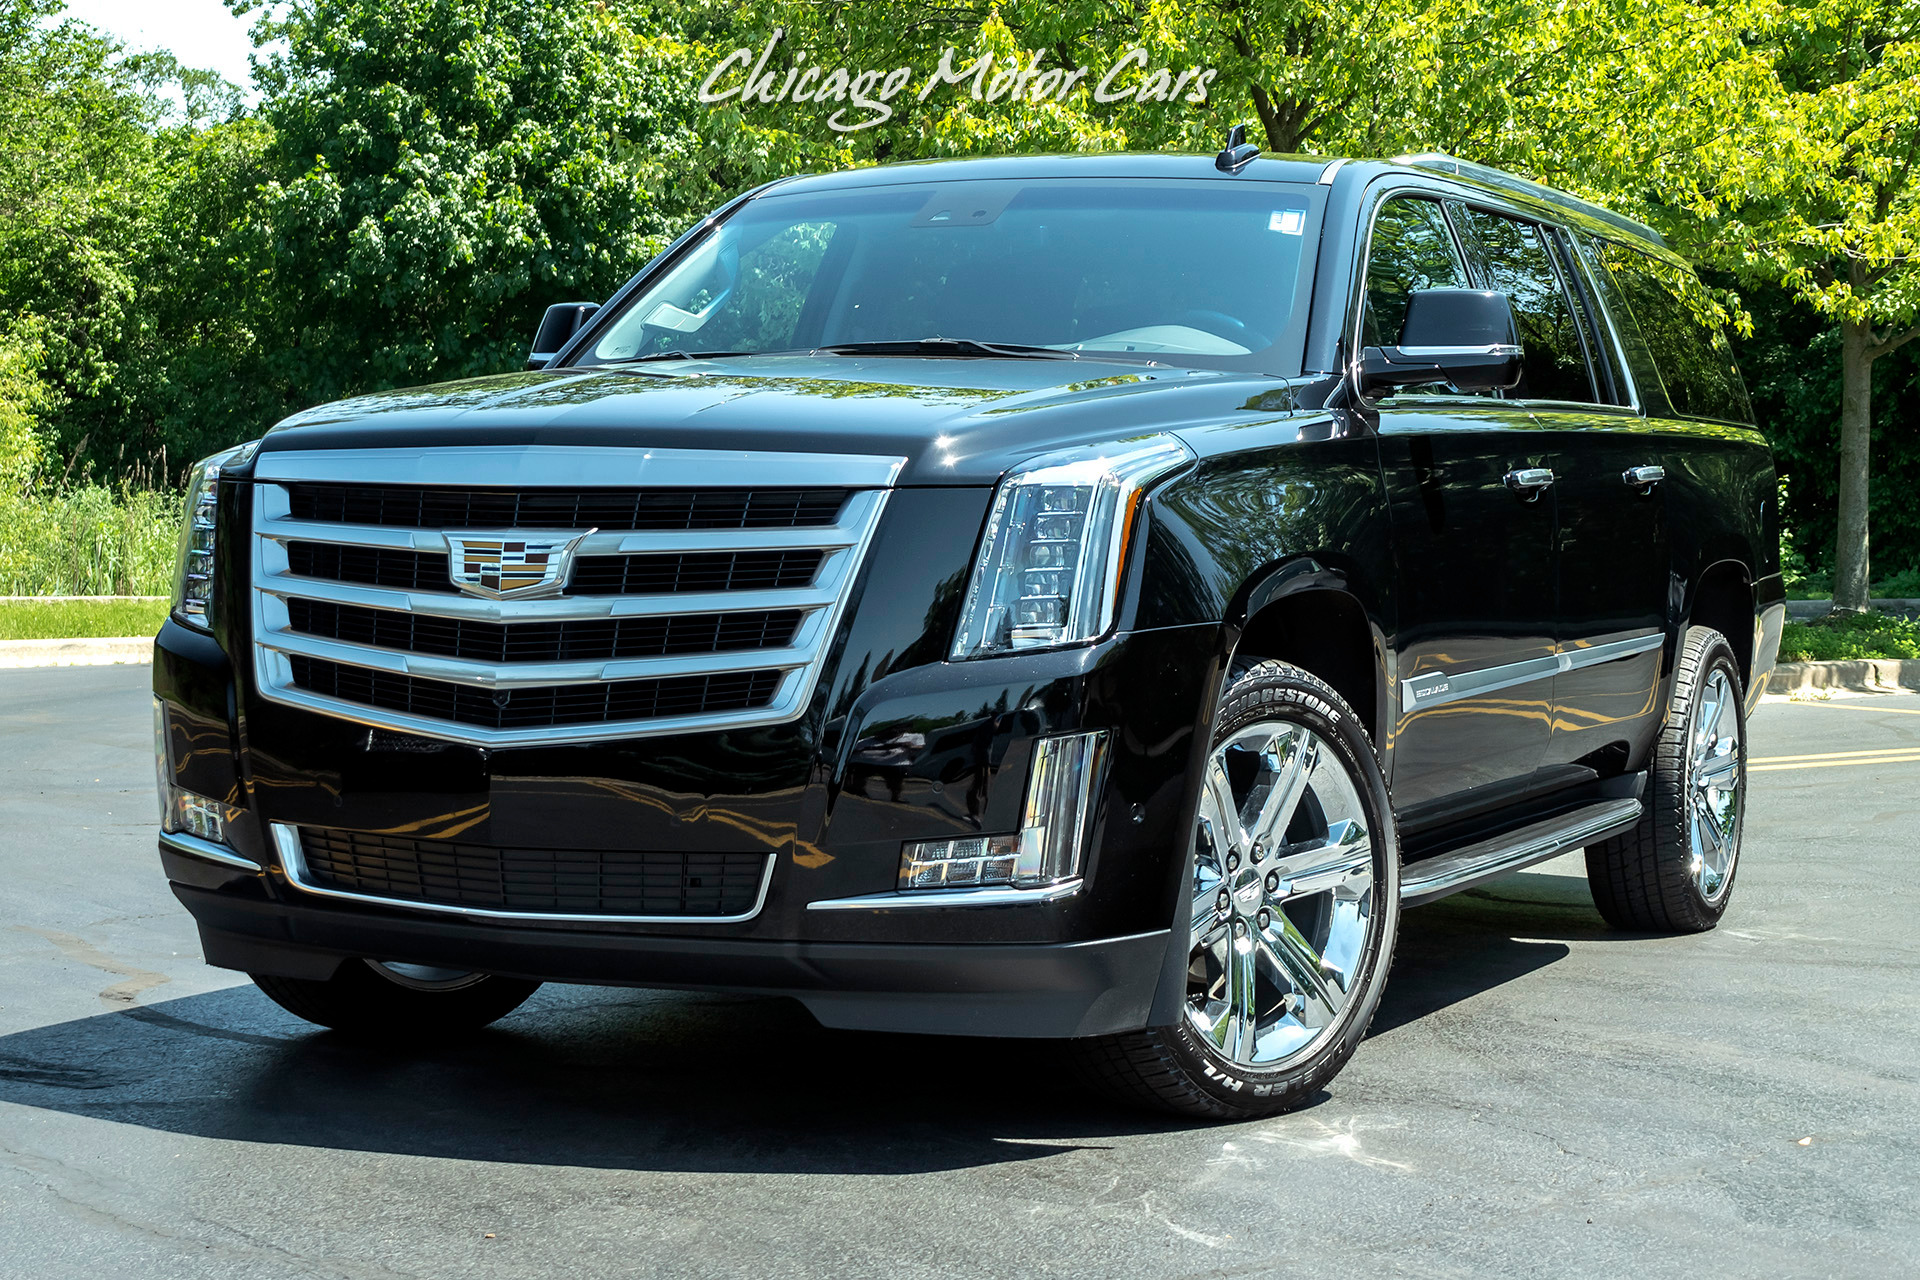 Used 2019 Cadillac Escalade ESV Luxury 4x4 For Sale (Special Pricing) |  Chicago Motor Cars Stock #17051A